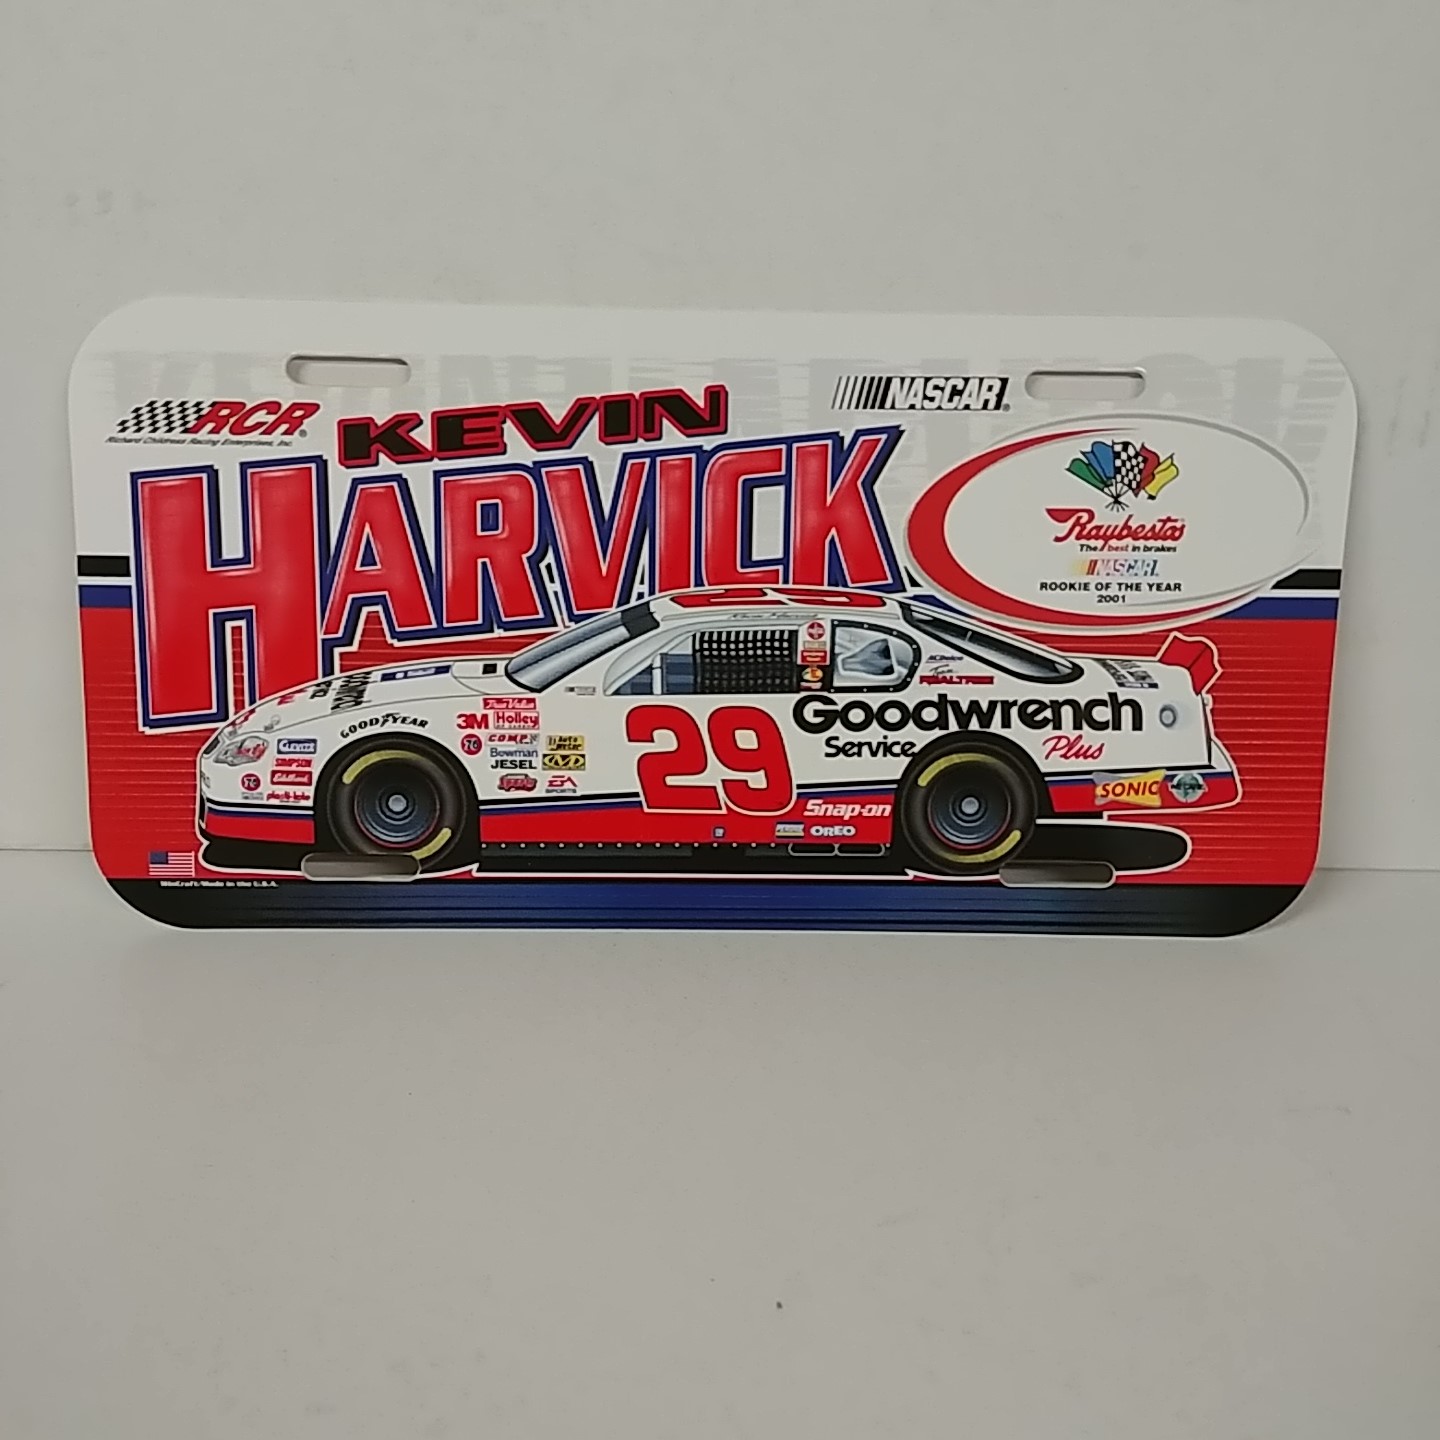 2001 Kevin Harvick Goodwrench "Rookie of theYear" plastic license plate